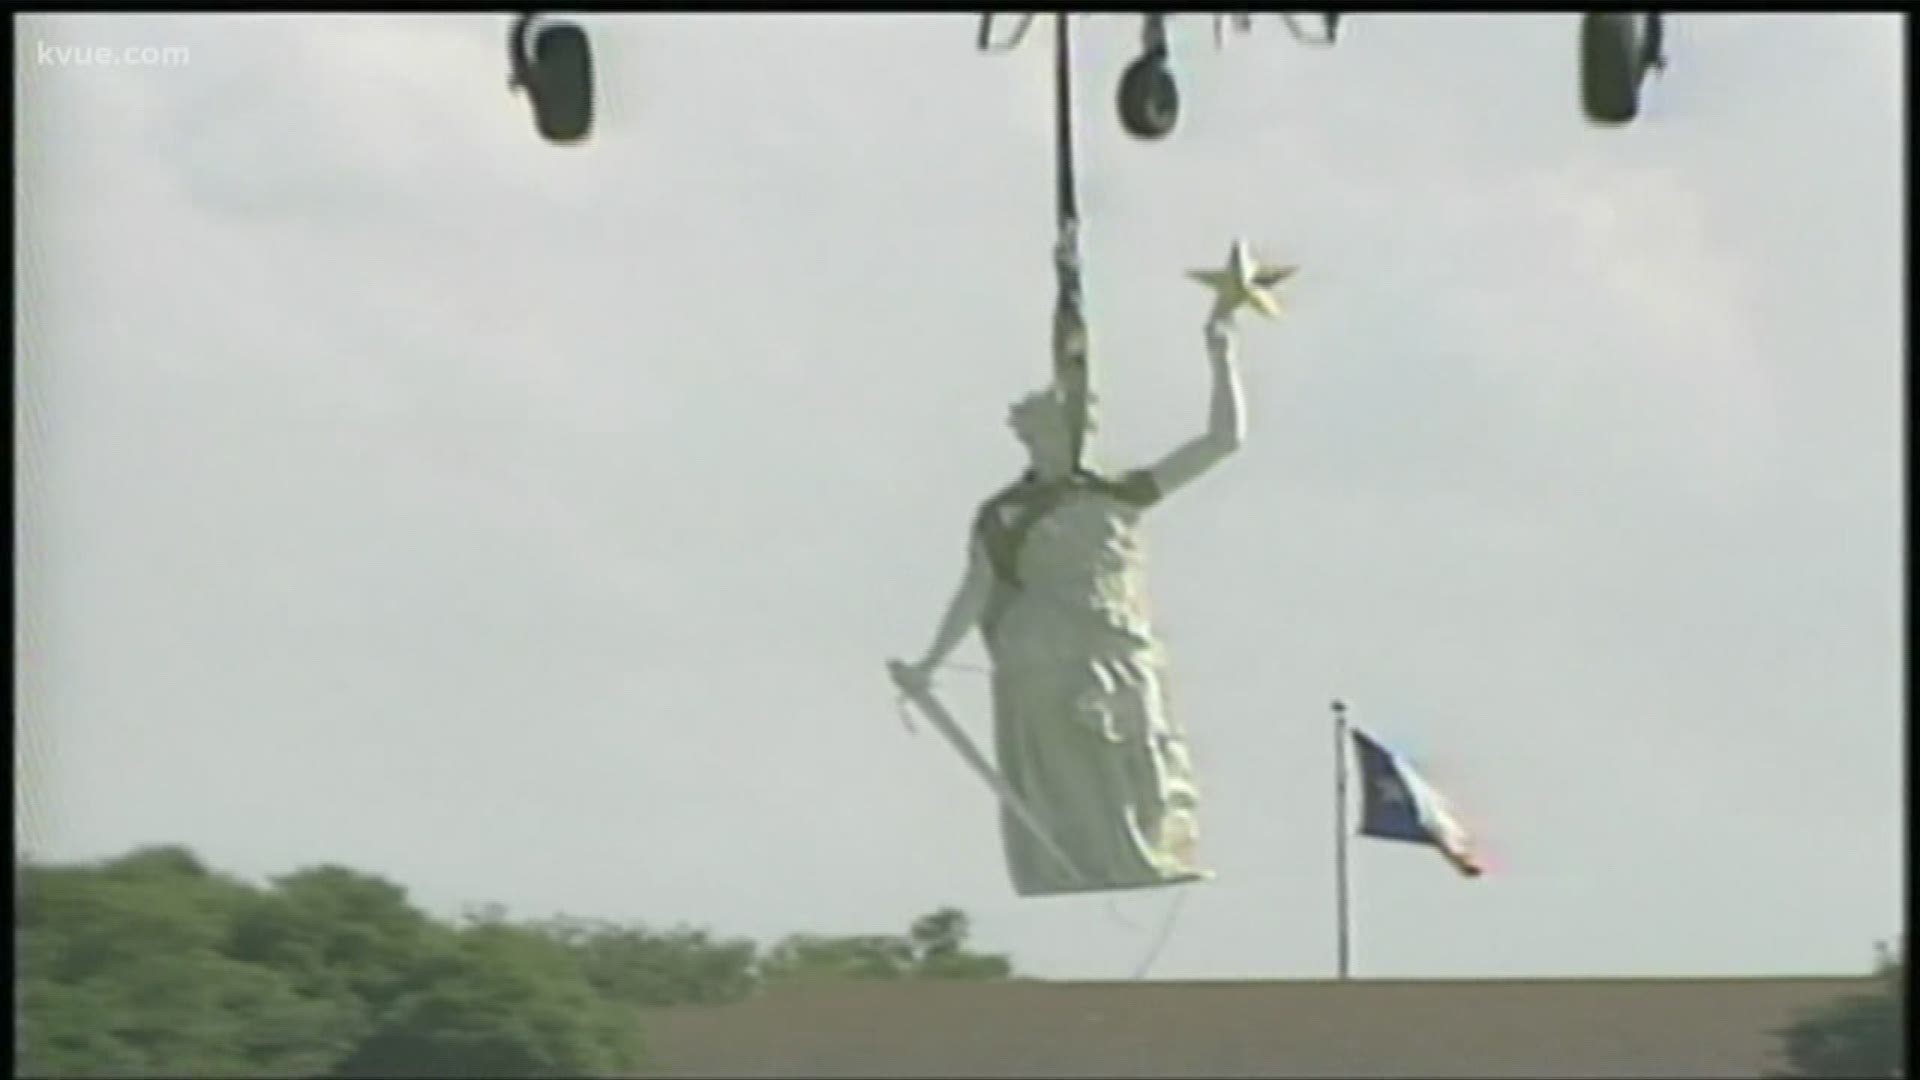 KVUE's Bob Buckalew tells us what makes the goddess so special.